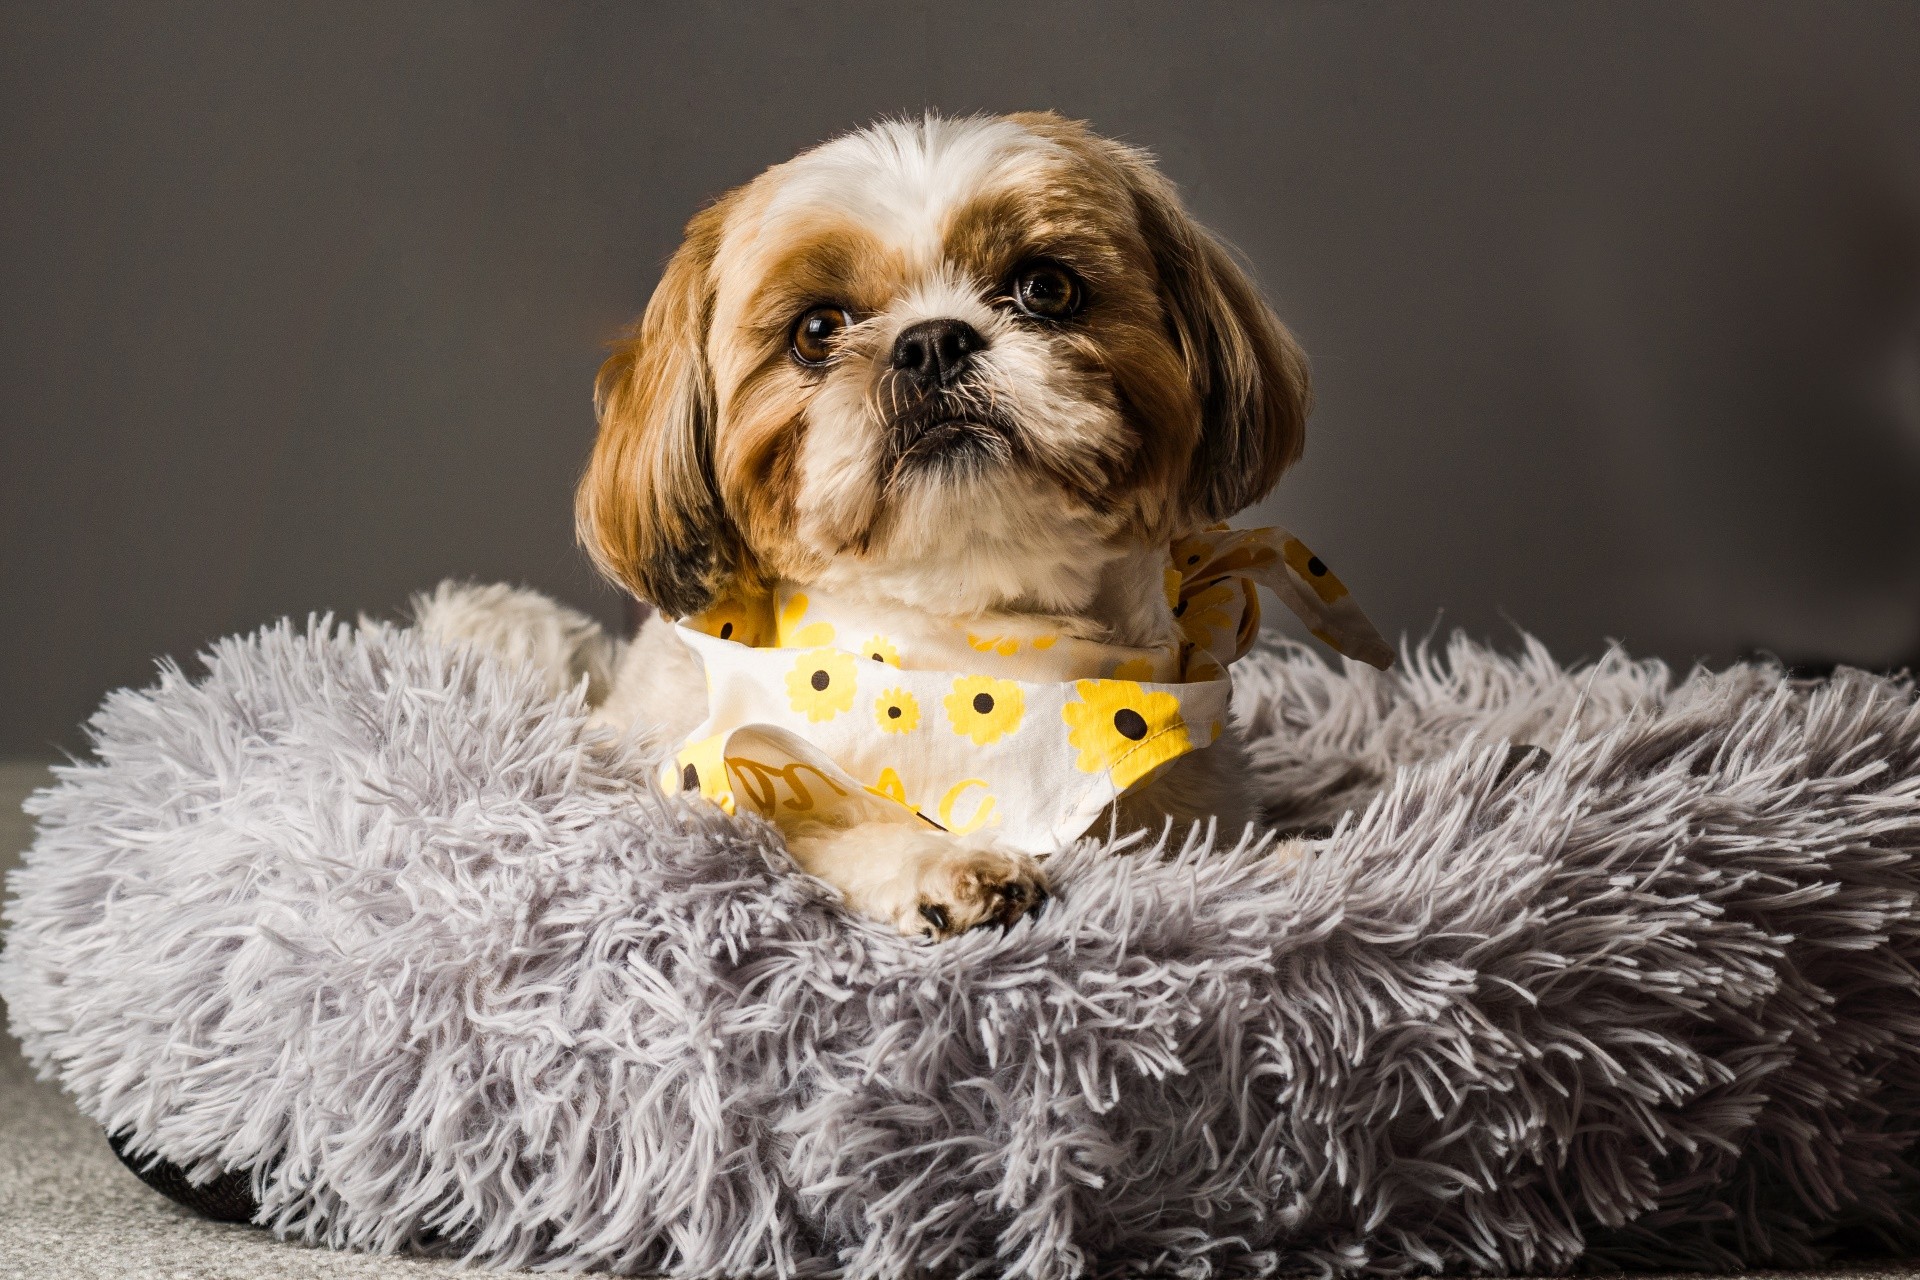 pet shih tzu in dog bed looking cute and fluffy with flower collar neckerchief bandana